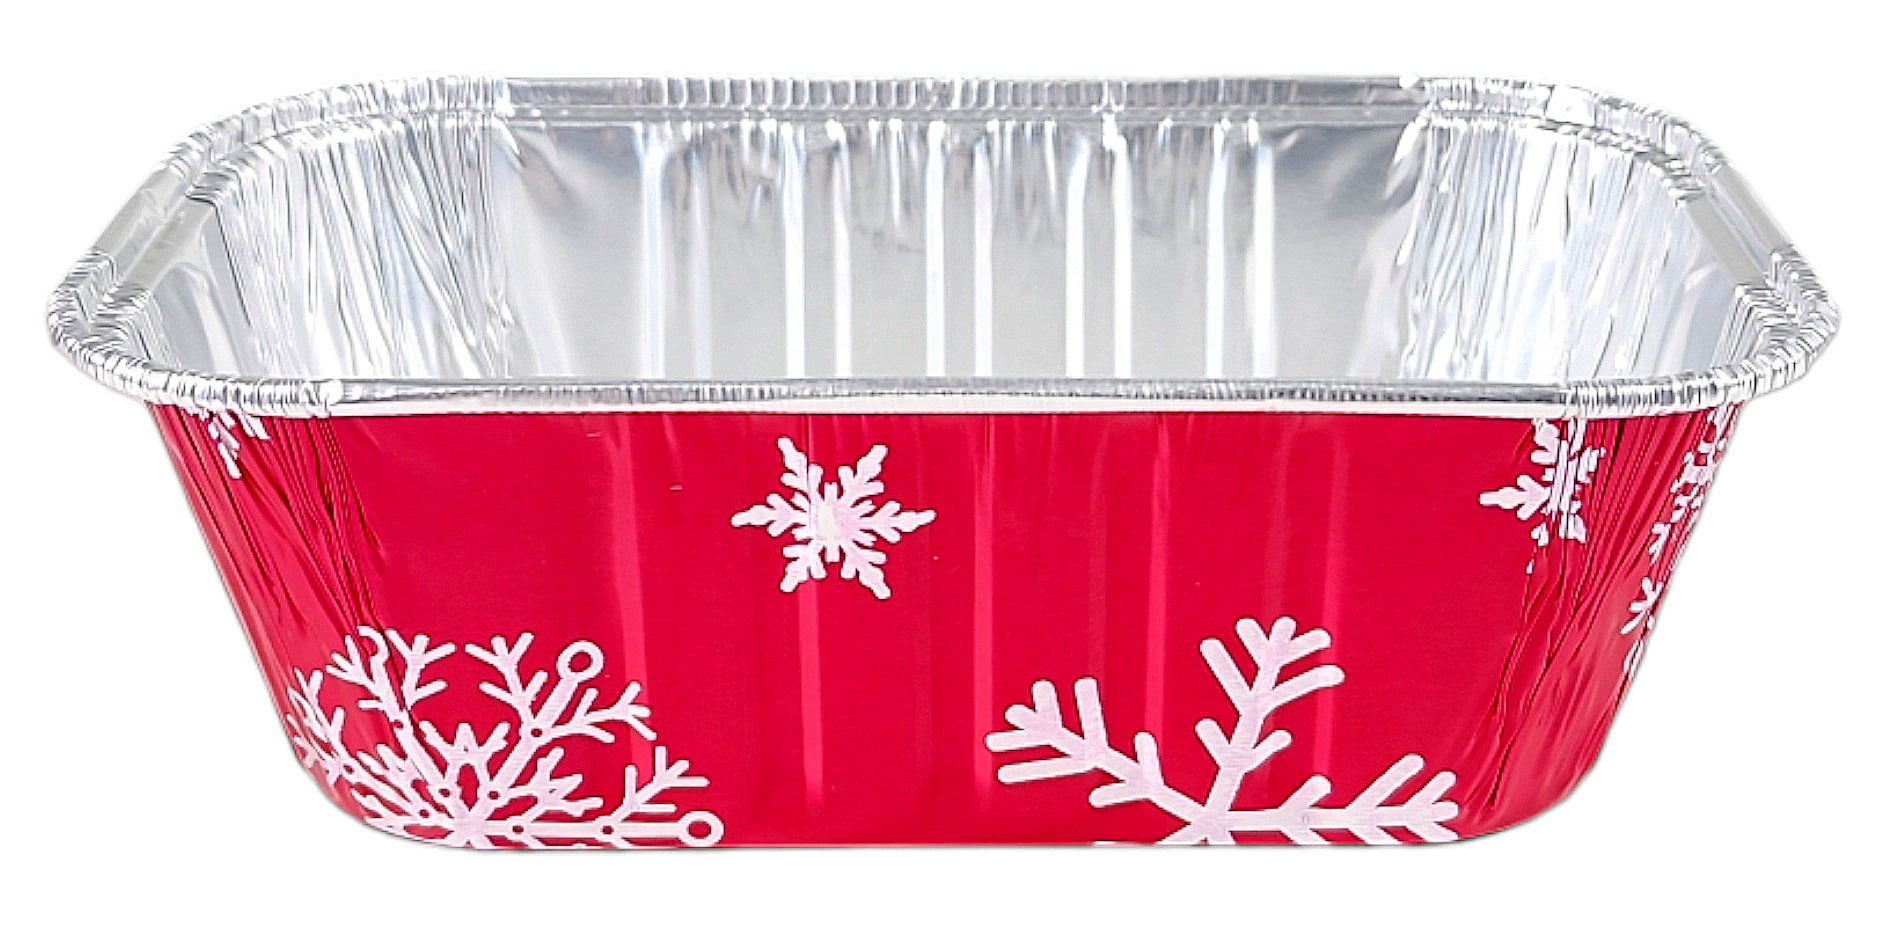 Pactogo 1 lb. Red Aluminum Foil Holiday Mini-Loaf Snowflake Pan w/Clear Low Dome Lid 200/CS